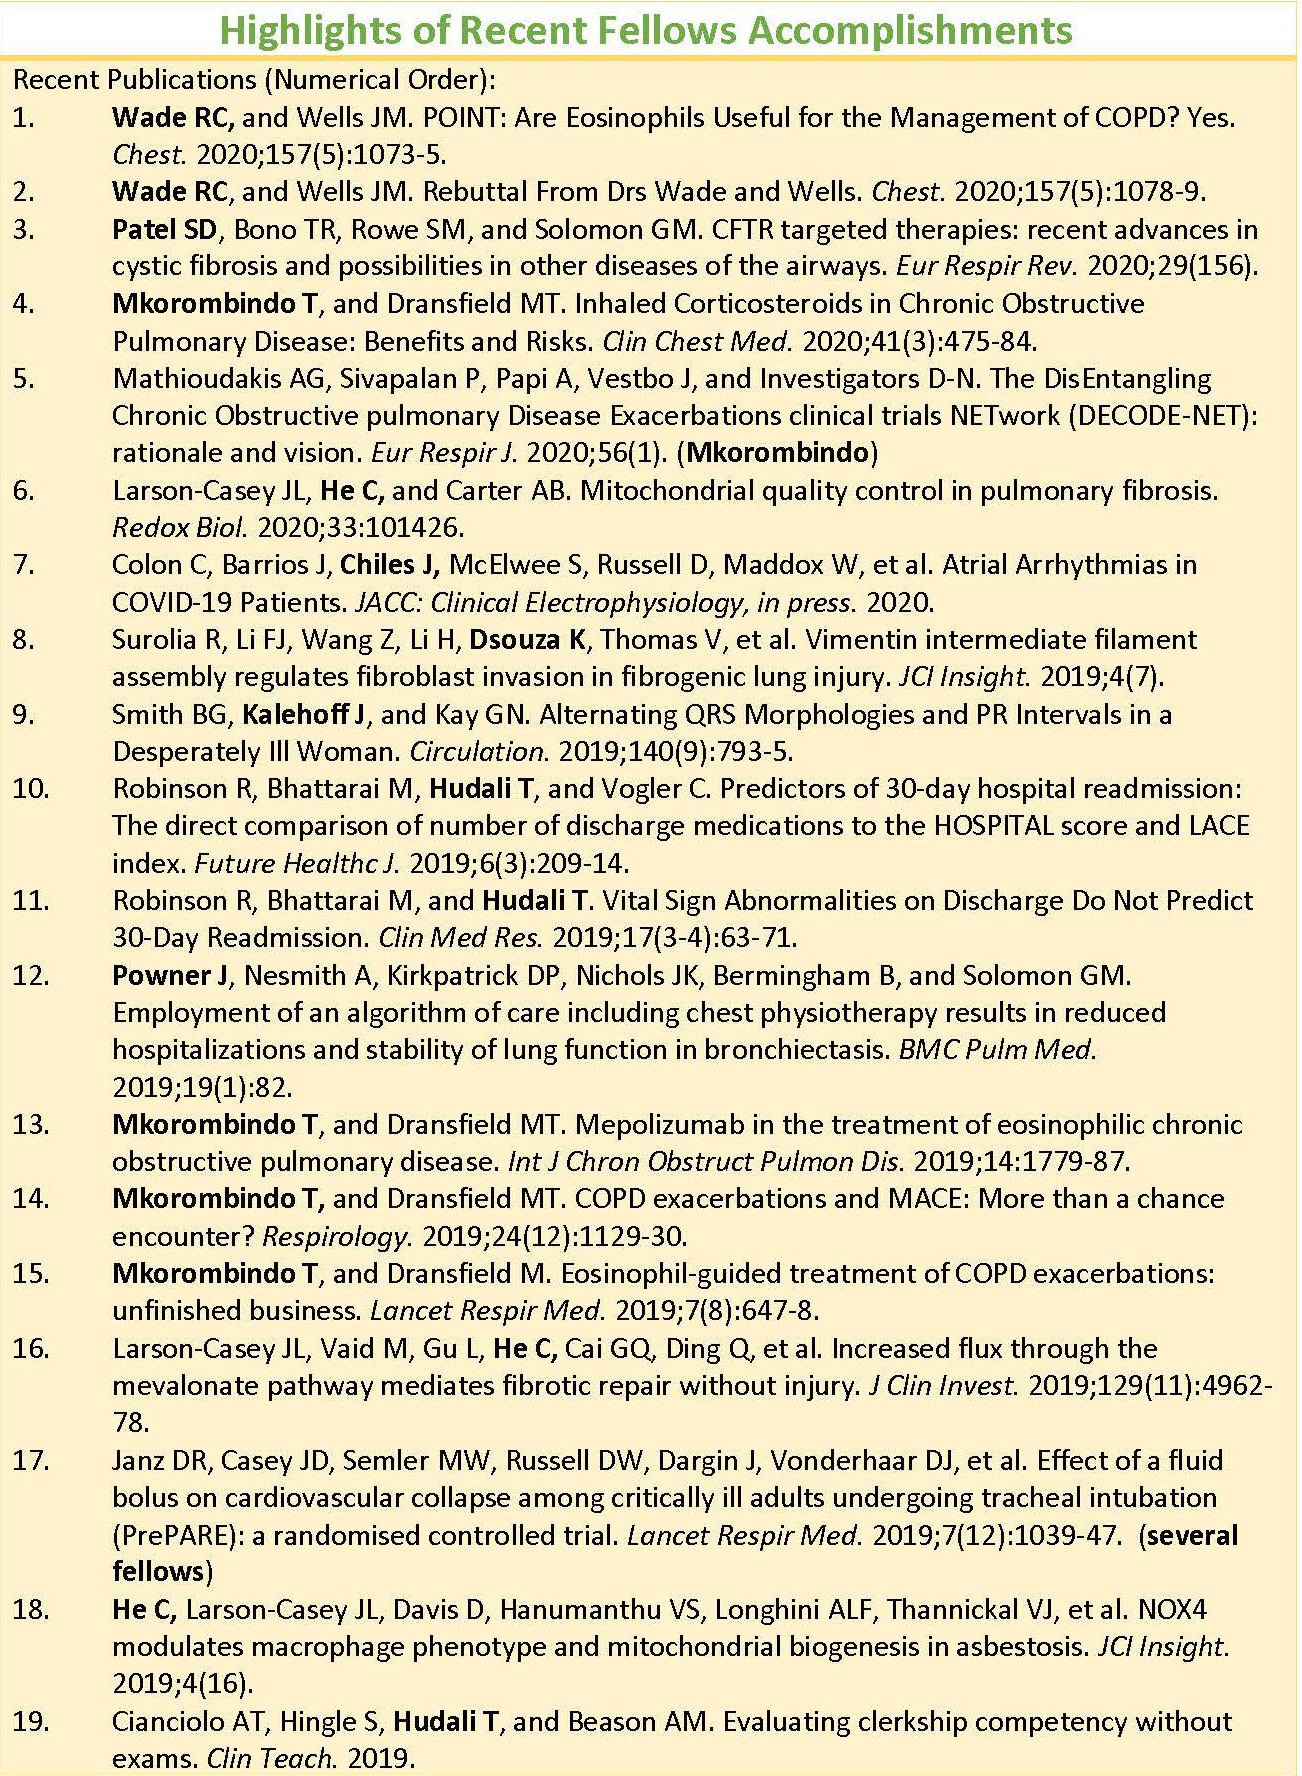 Highlights of Recent Fellows Accomplishments1 Page 1